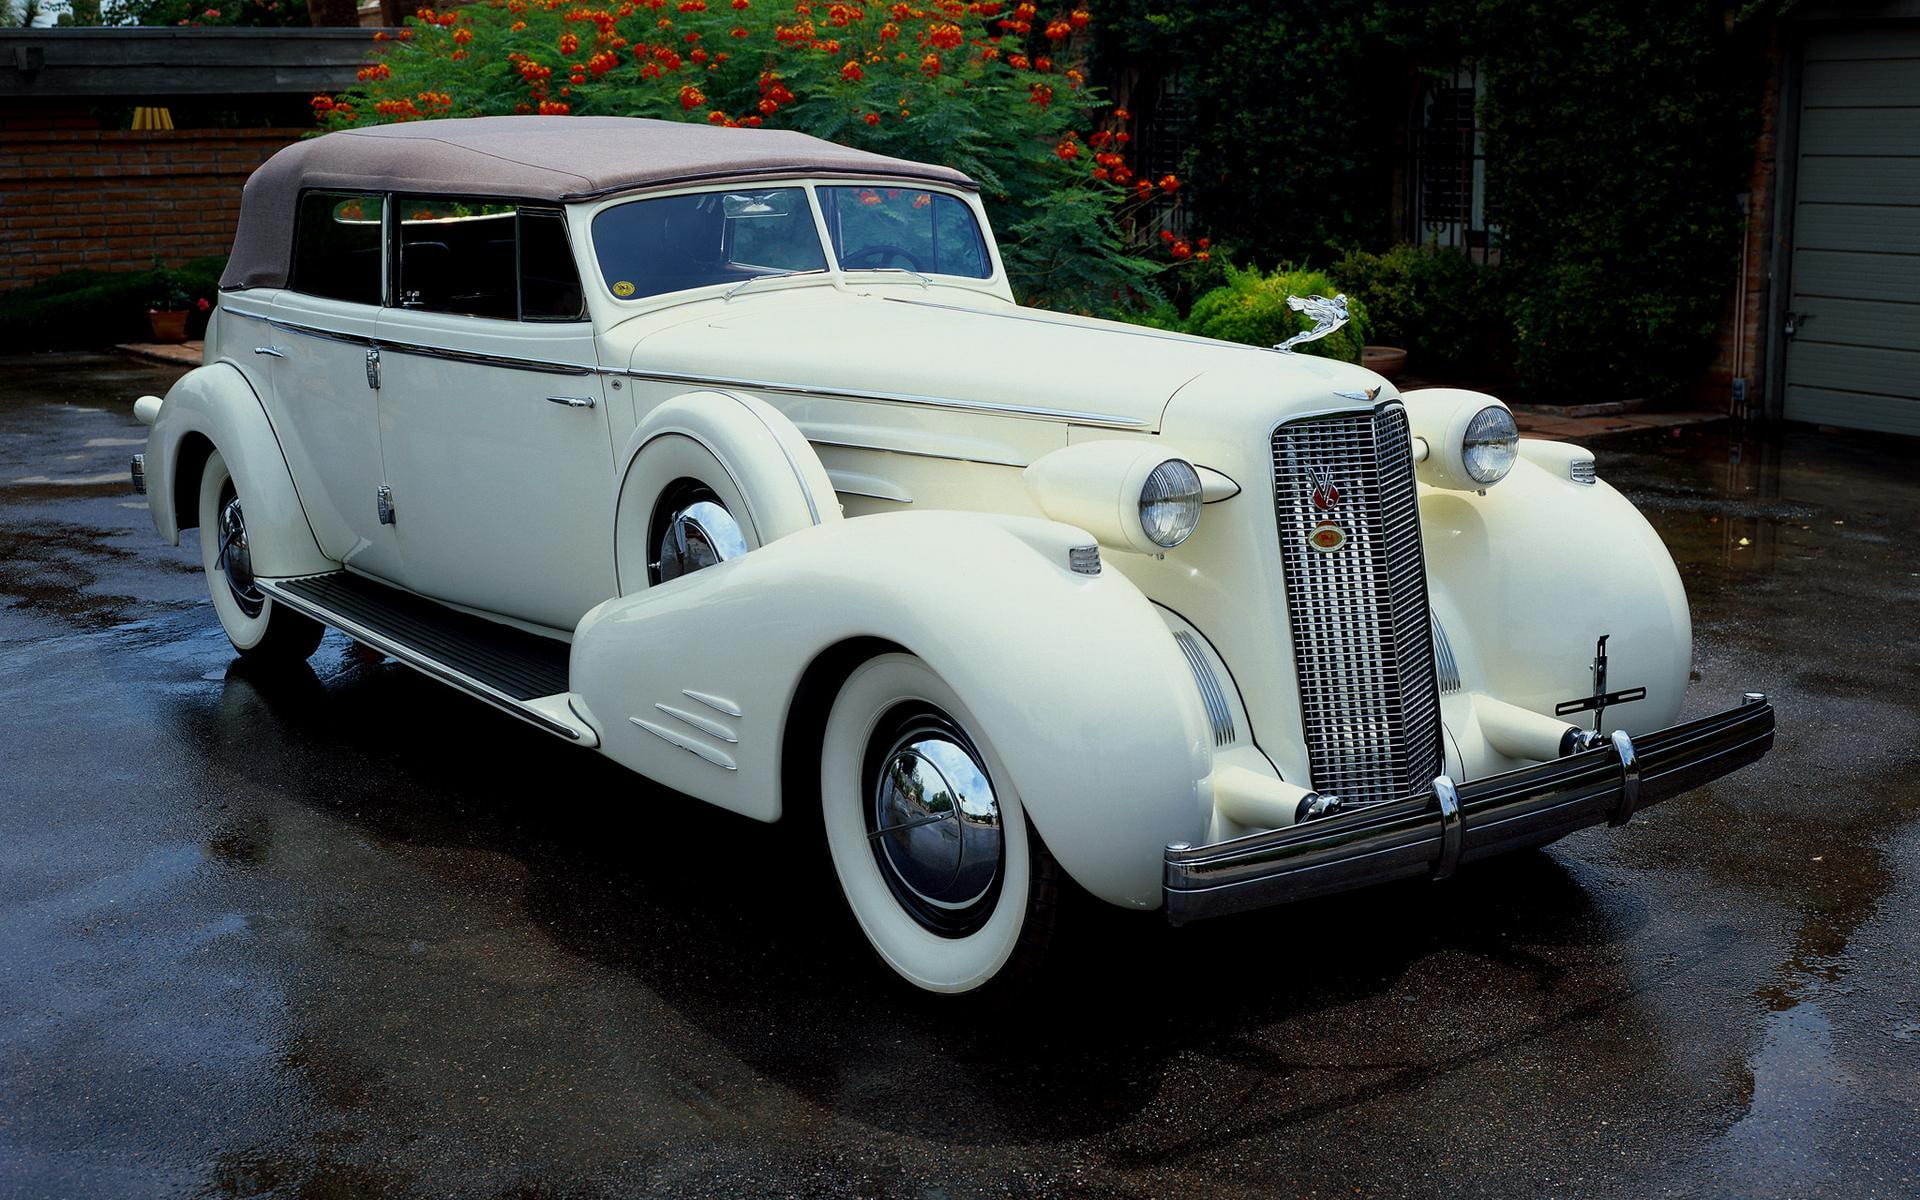 1936 Cadillac V-16 Series 90, white vintage coupe, cars, 1920x1200